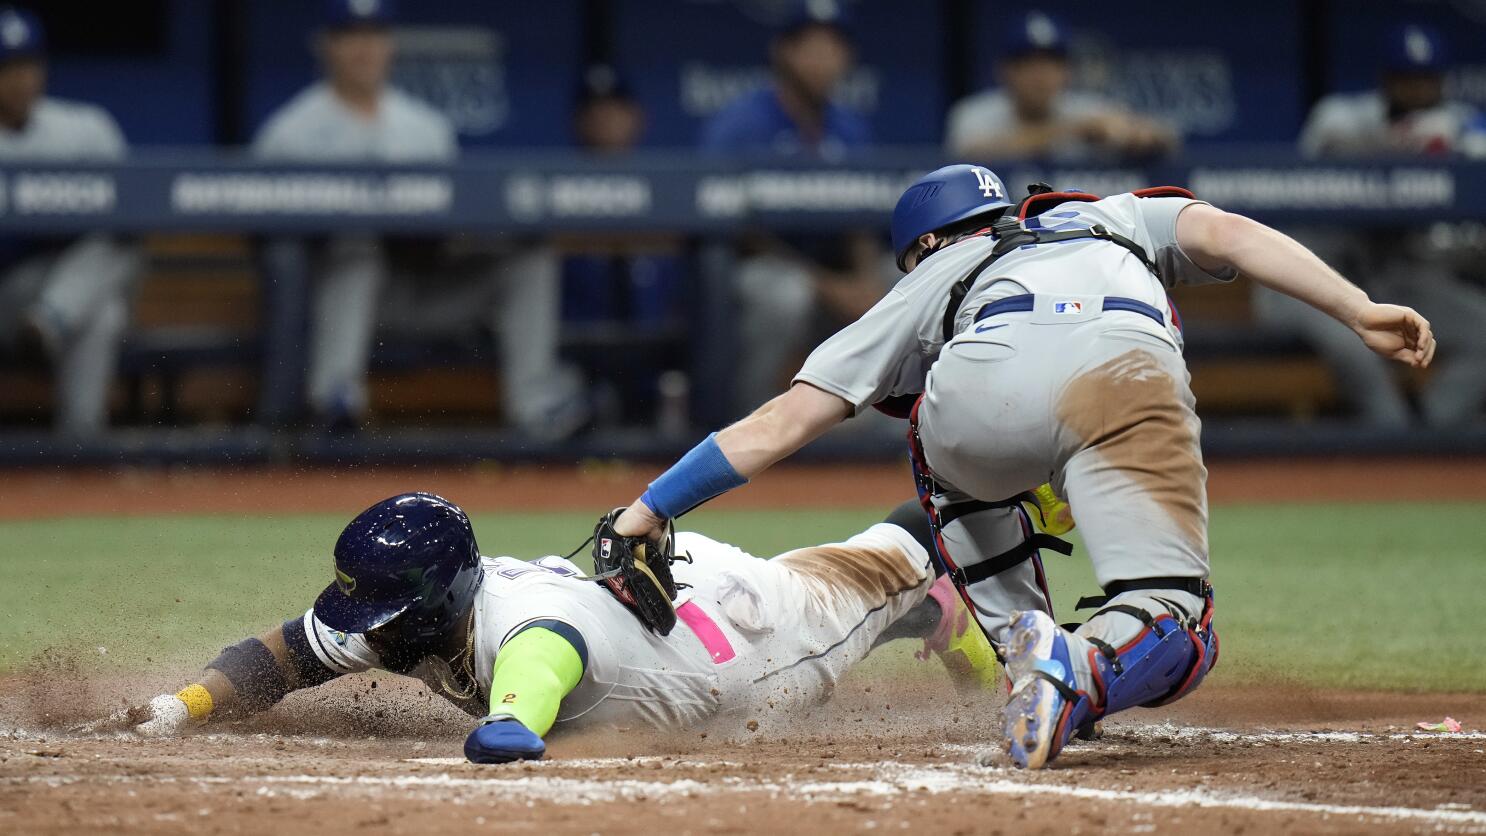 2020 World Series photos; Best shots from Dodgers vs. Rays